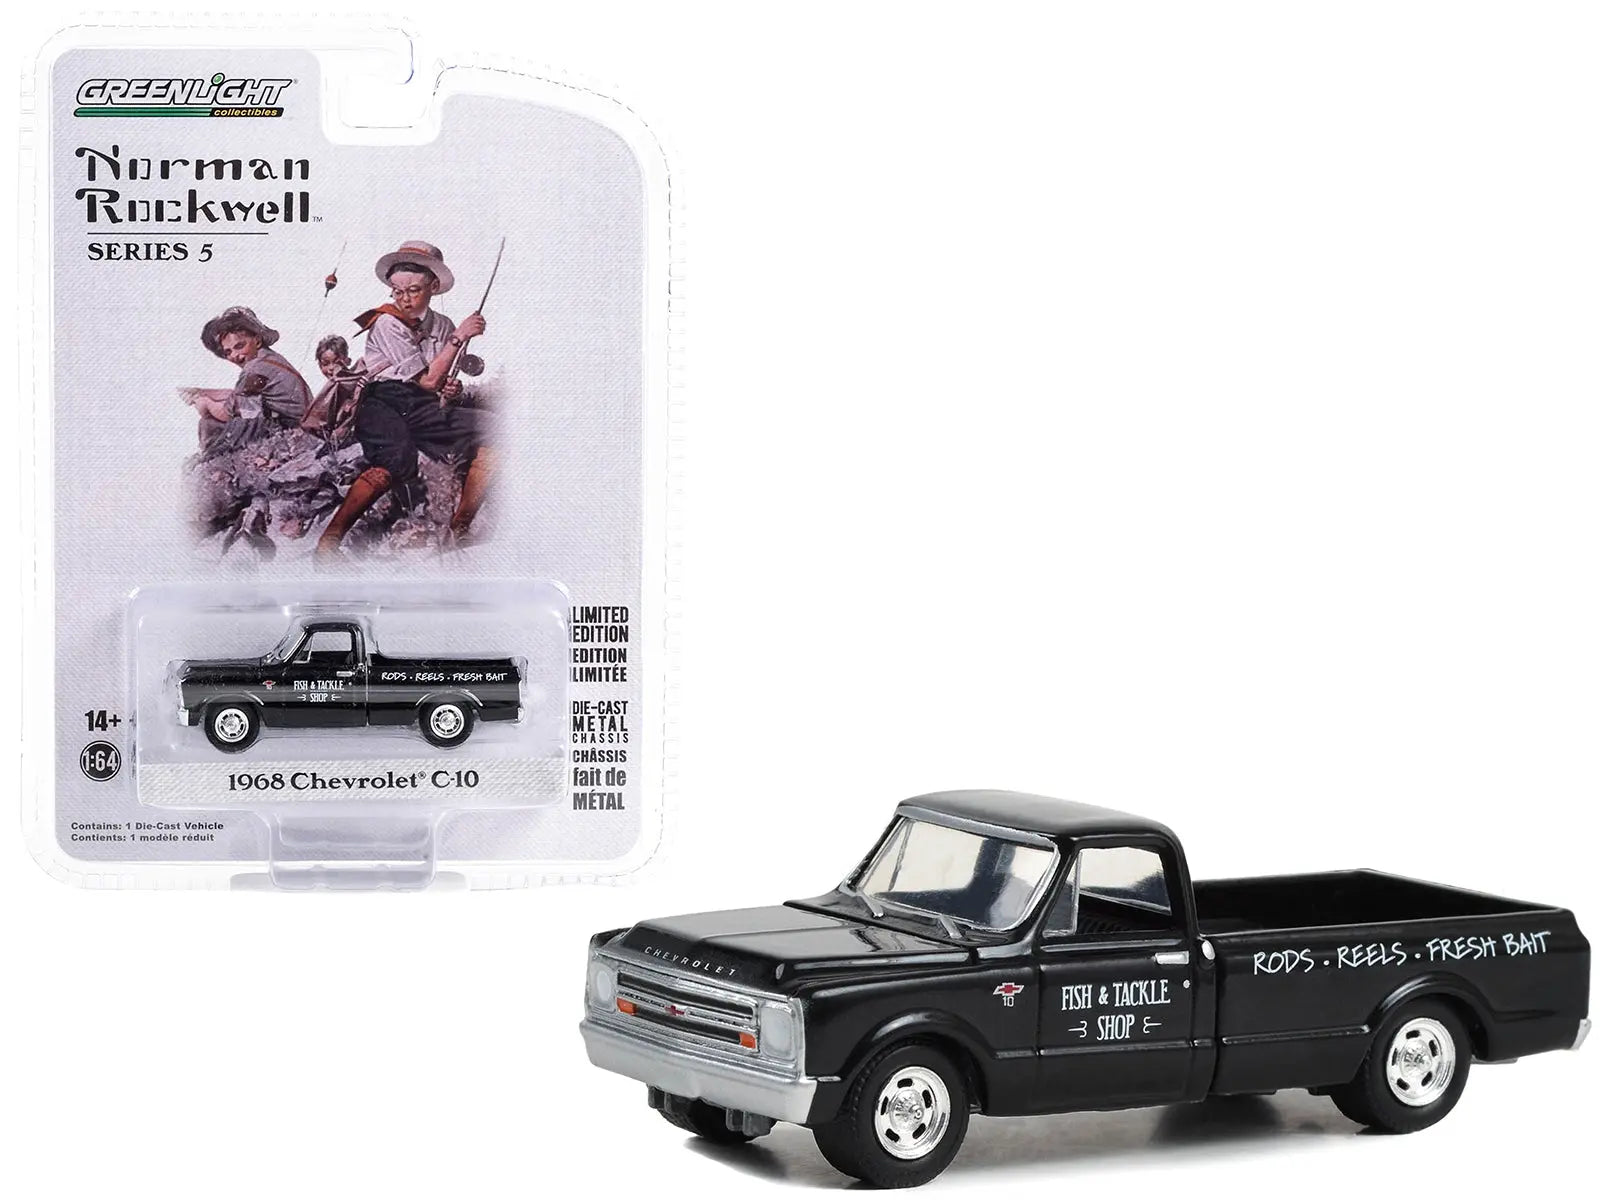 1968 Chevrolet C-10 Pickup Truck Black "Fish & Tackle Shop" "Norman Rockwell" Series 5 1/64 Diecast Model Car by Greenlight Greenlight